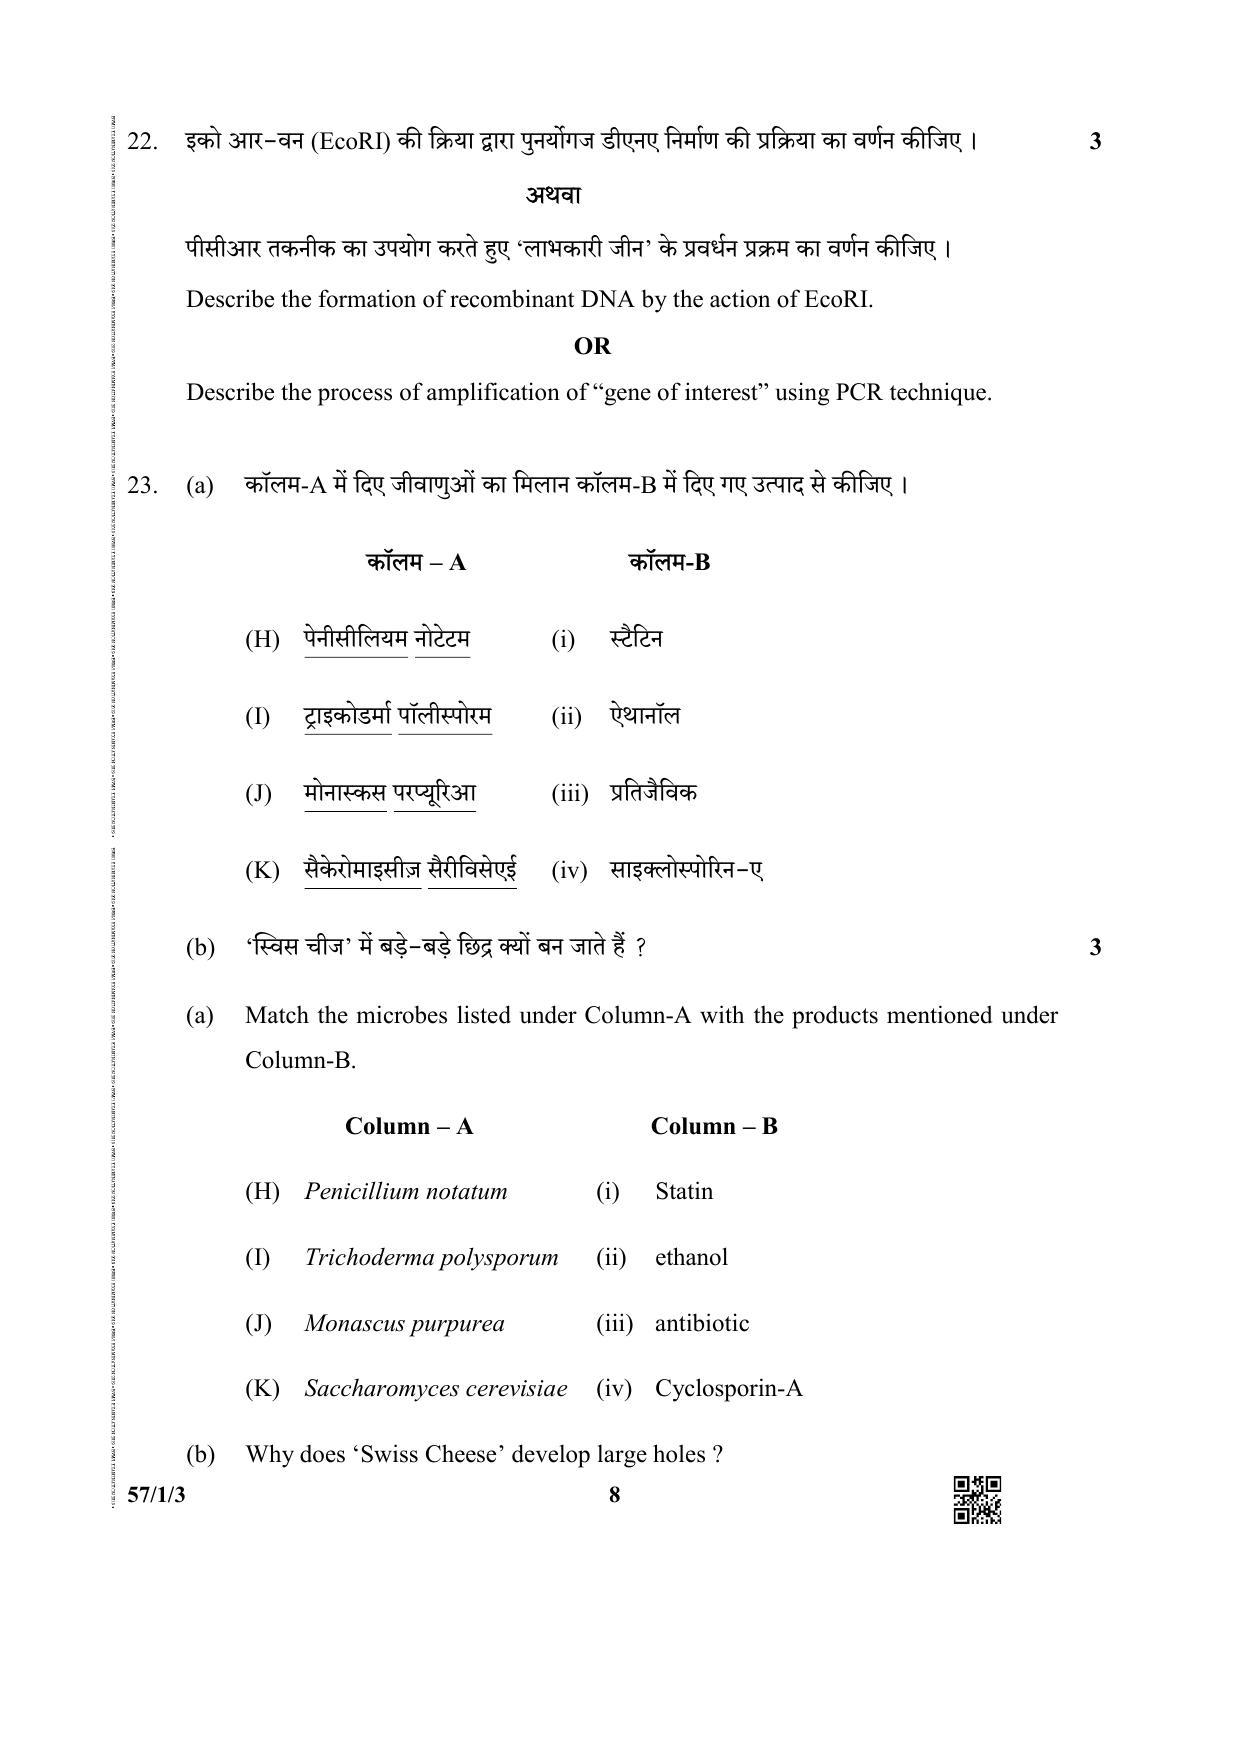 CBSE Class 12 57-3 (Biology) 2019 Question Paper - Page 8